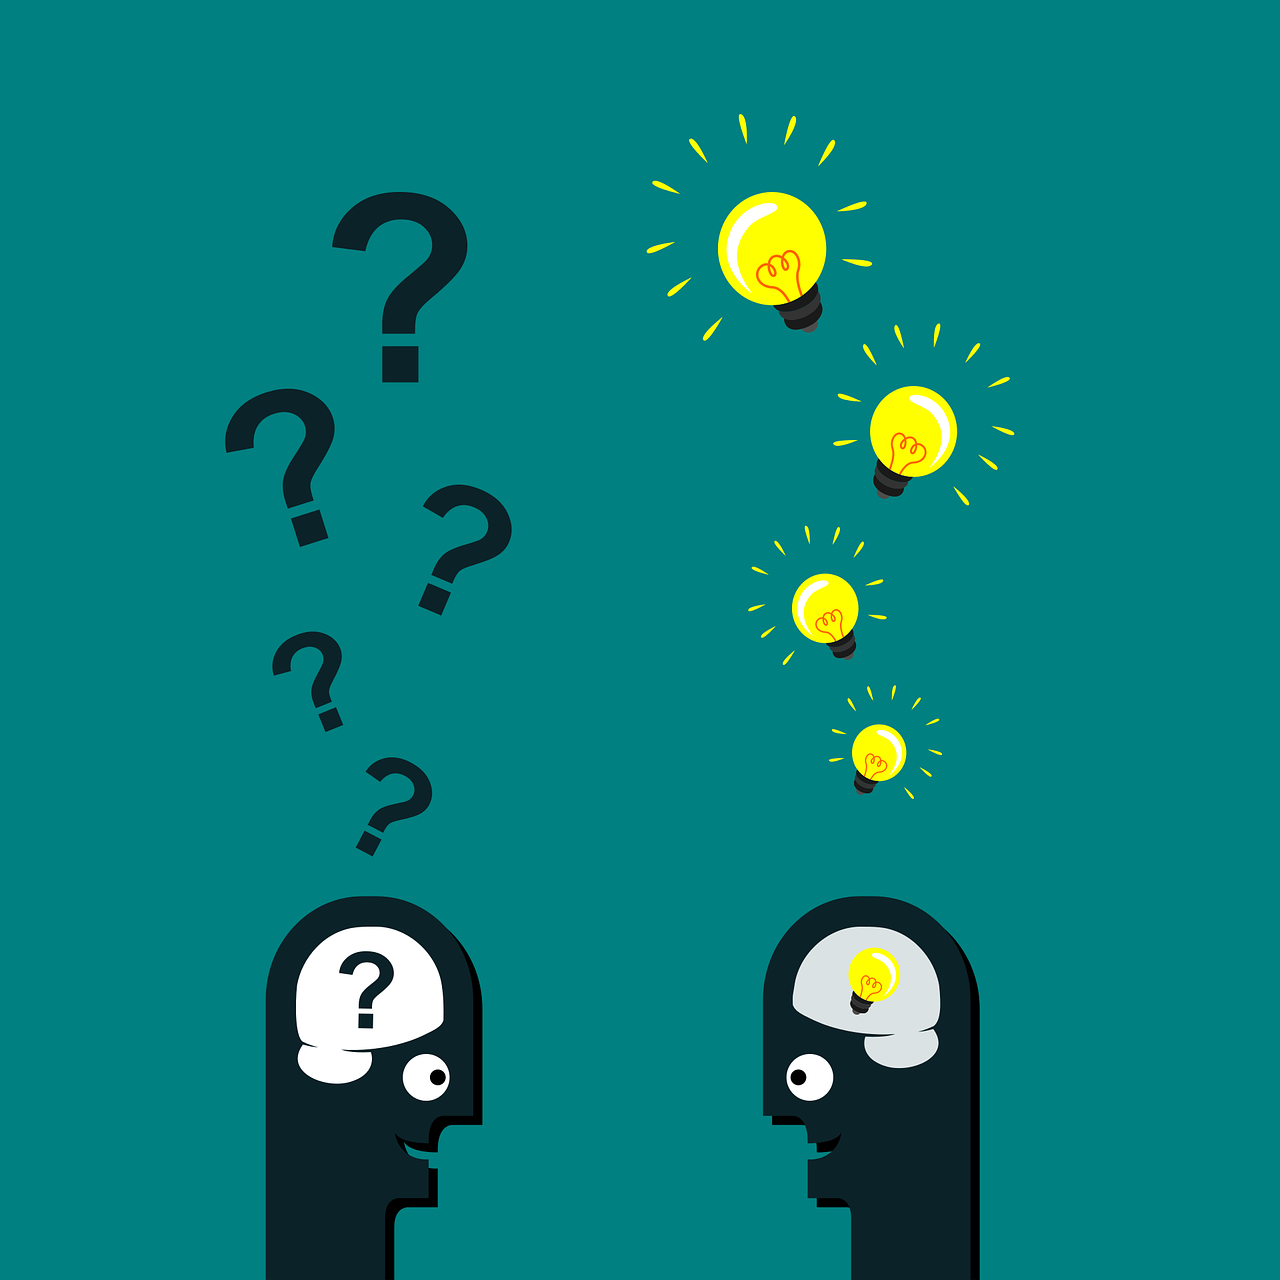 Dark teal colored background with two talking heads facing each other one has question marks floating up and out of their brain, the other light bulbs